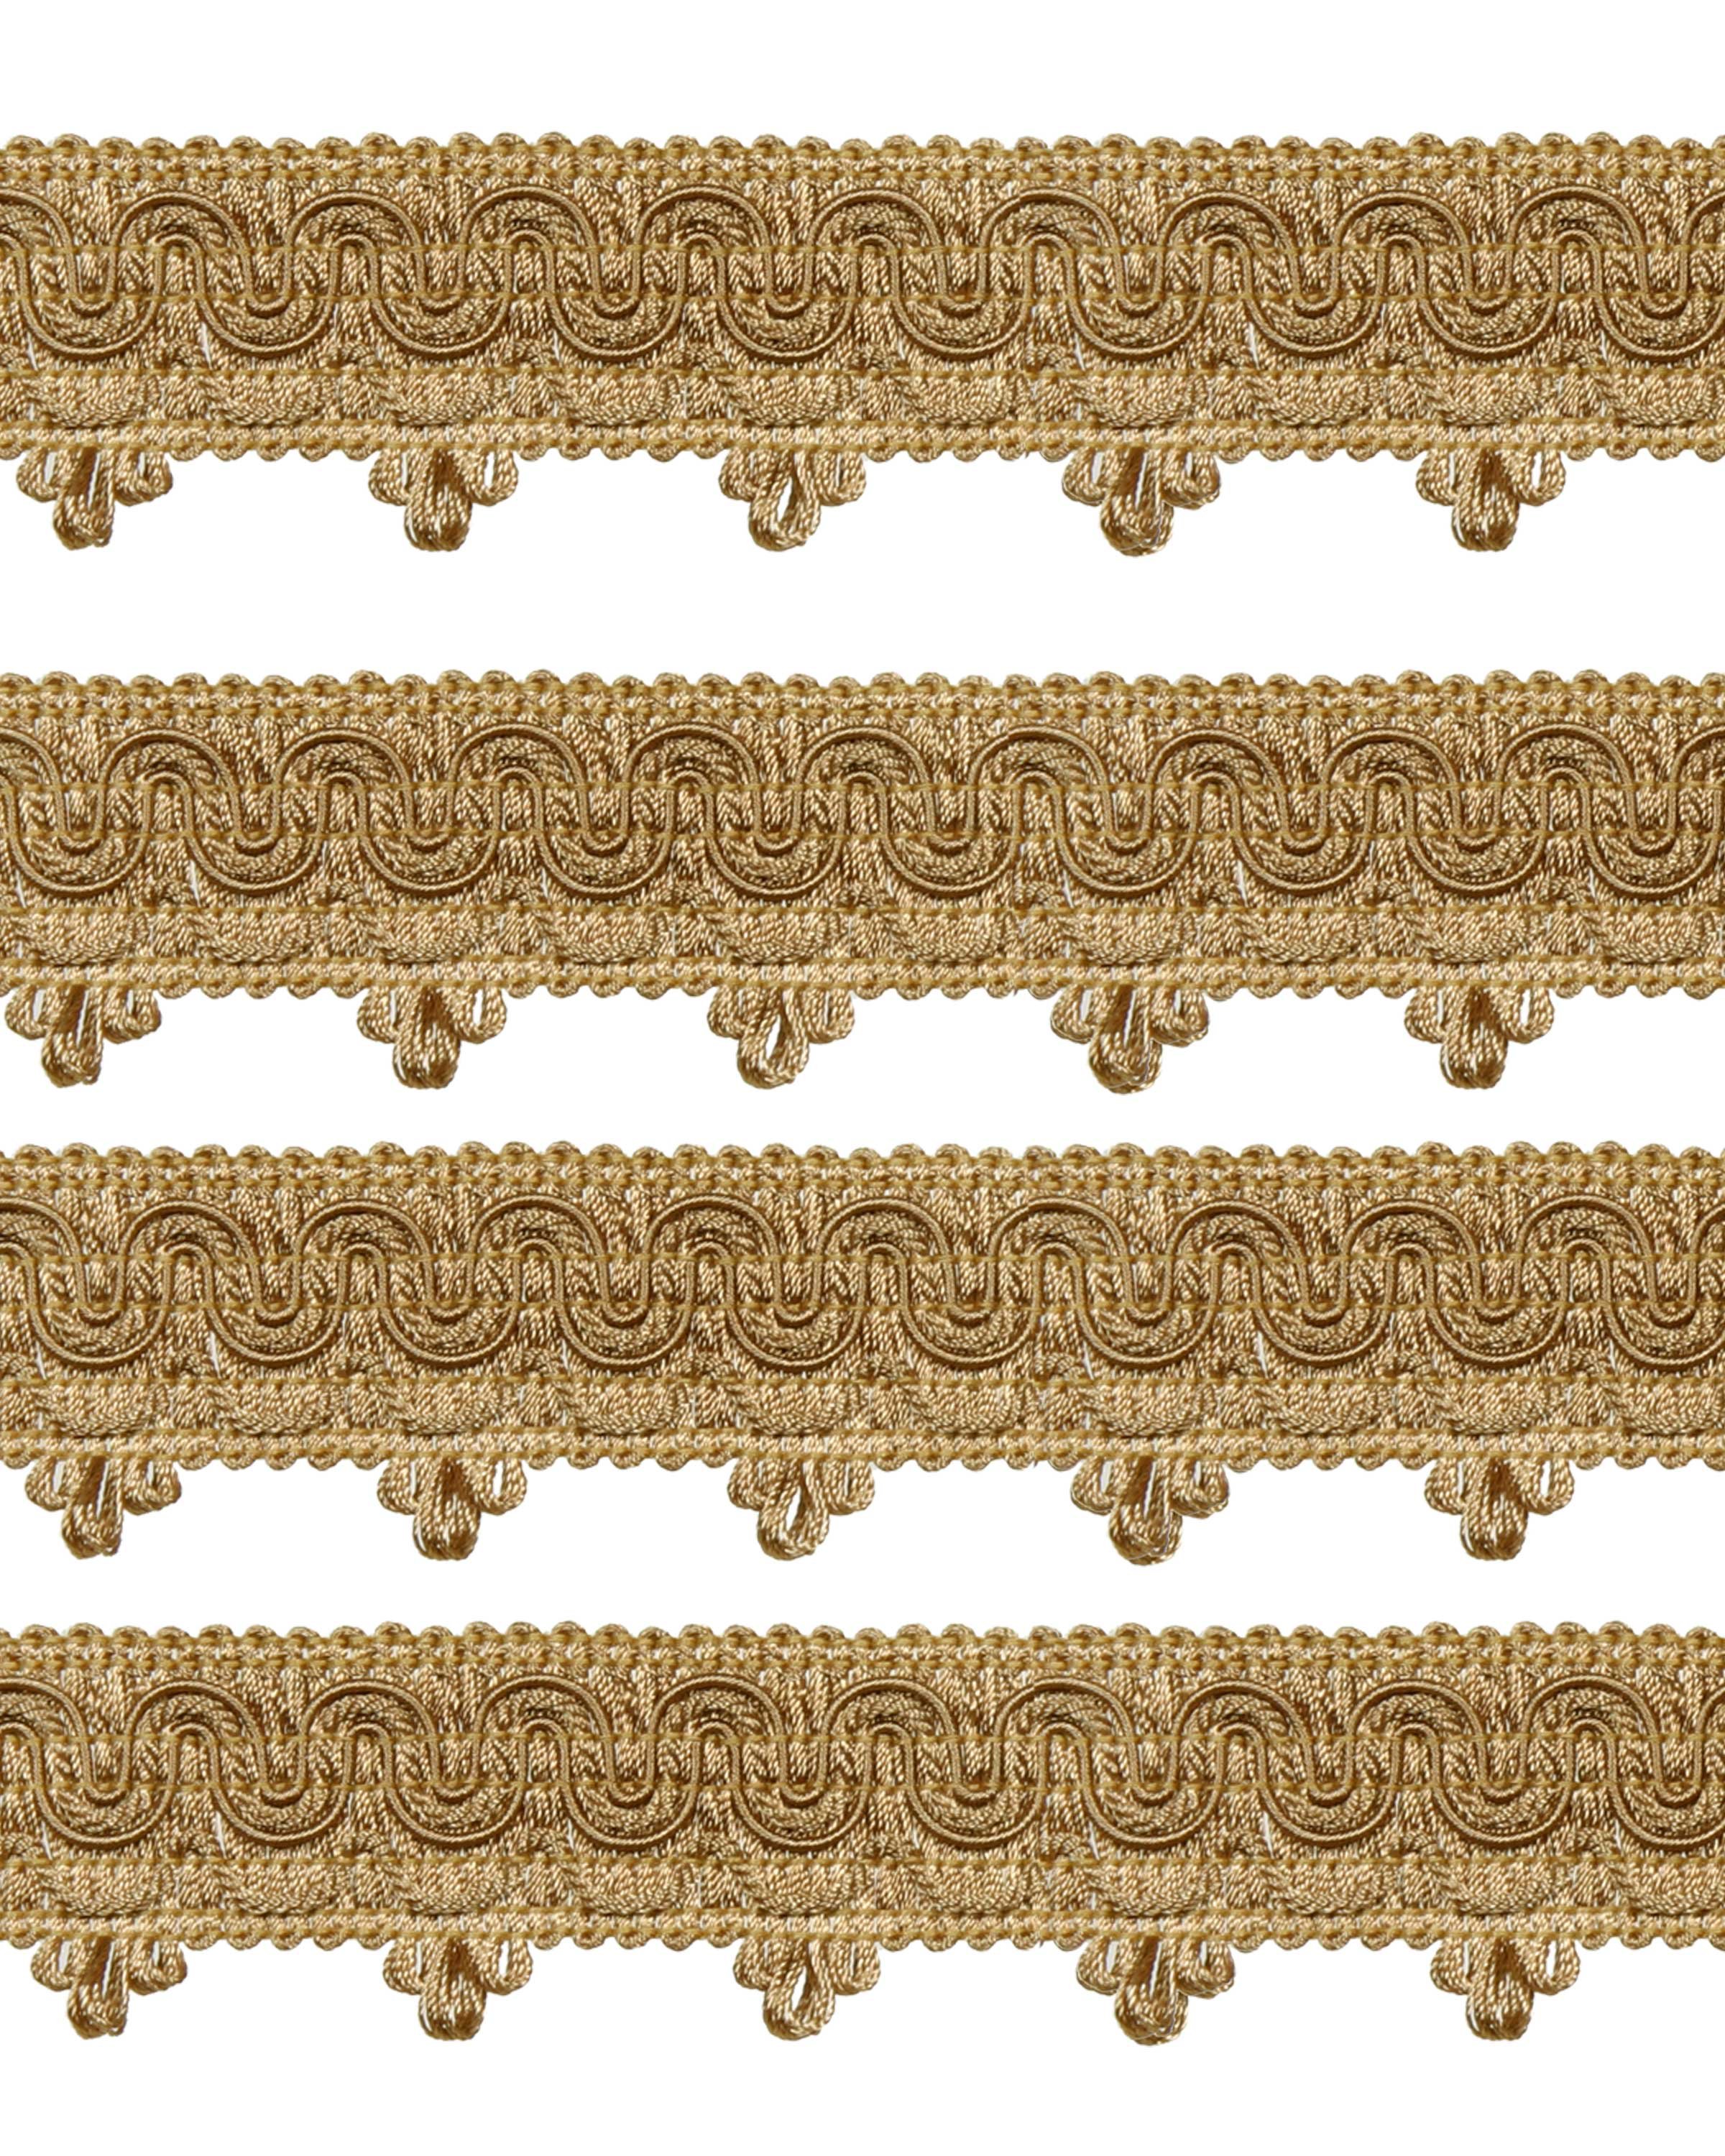 Ornate Scalloped Braid - Gold 45mm Price is for 5 metres